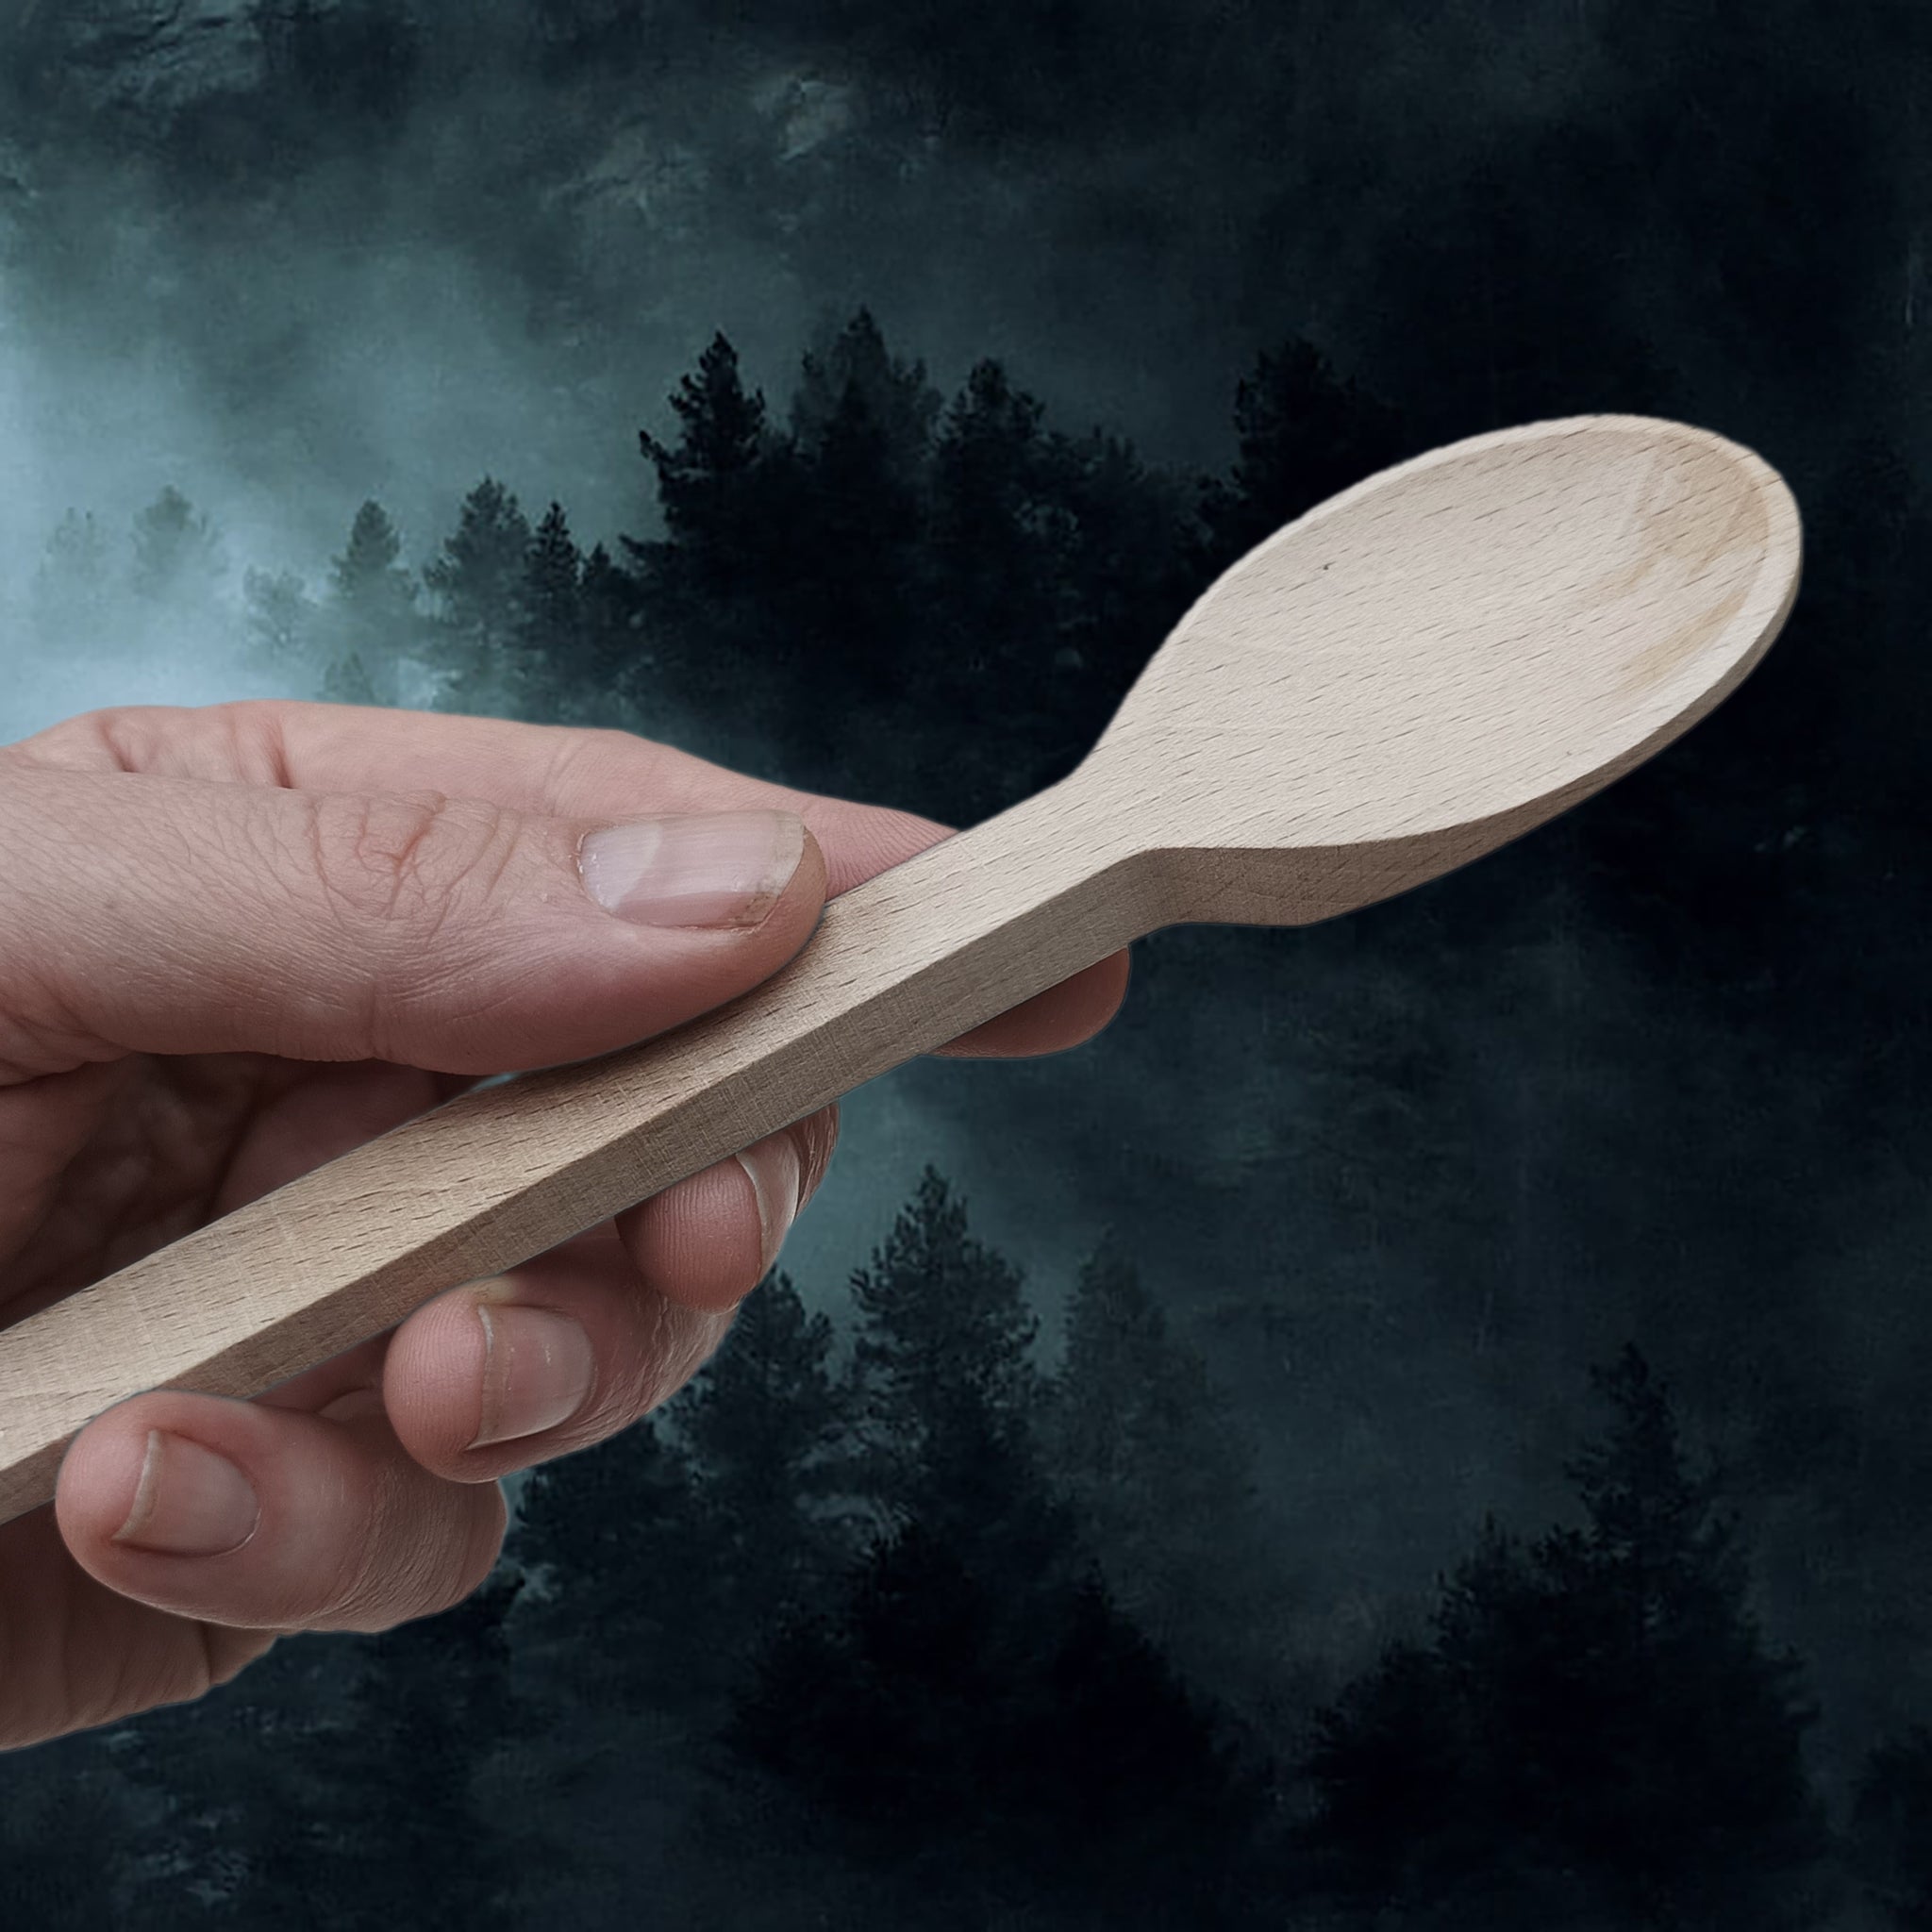 Large Wooden Viking / Medieval Spoon in Hand - Angle View Facing Up